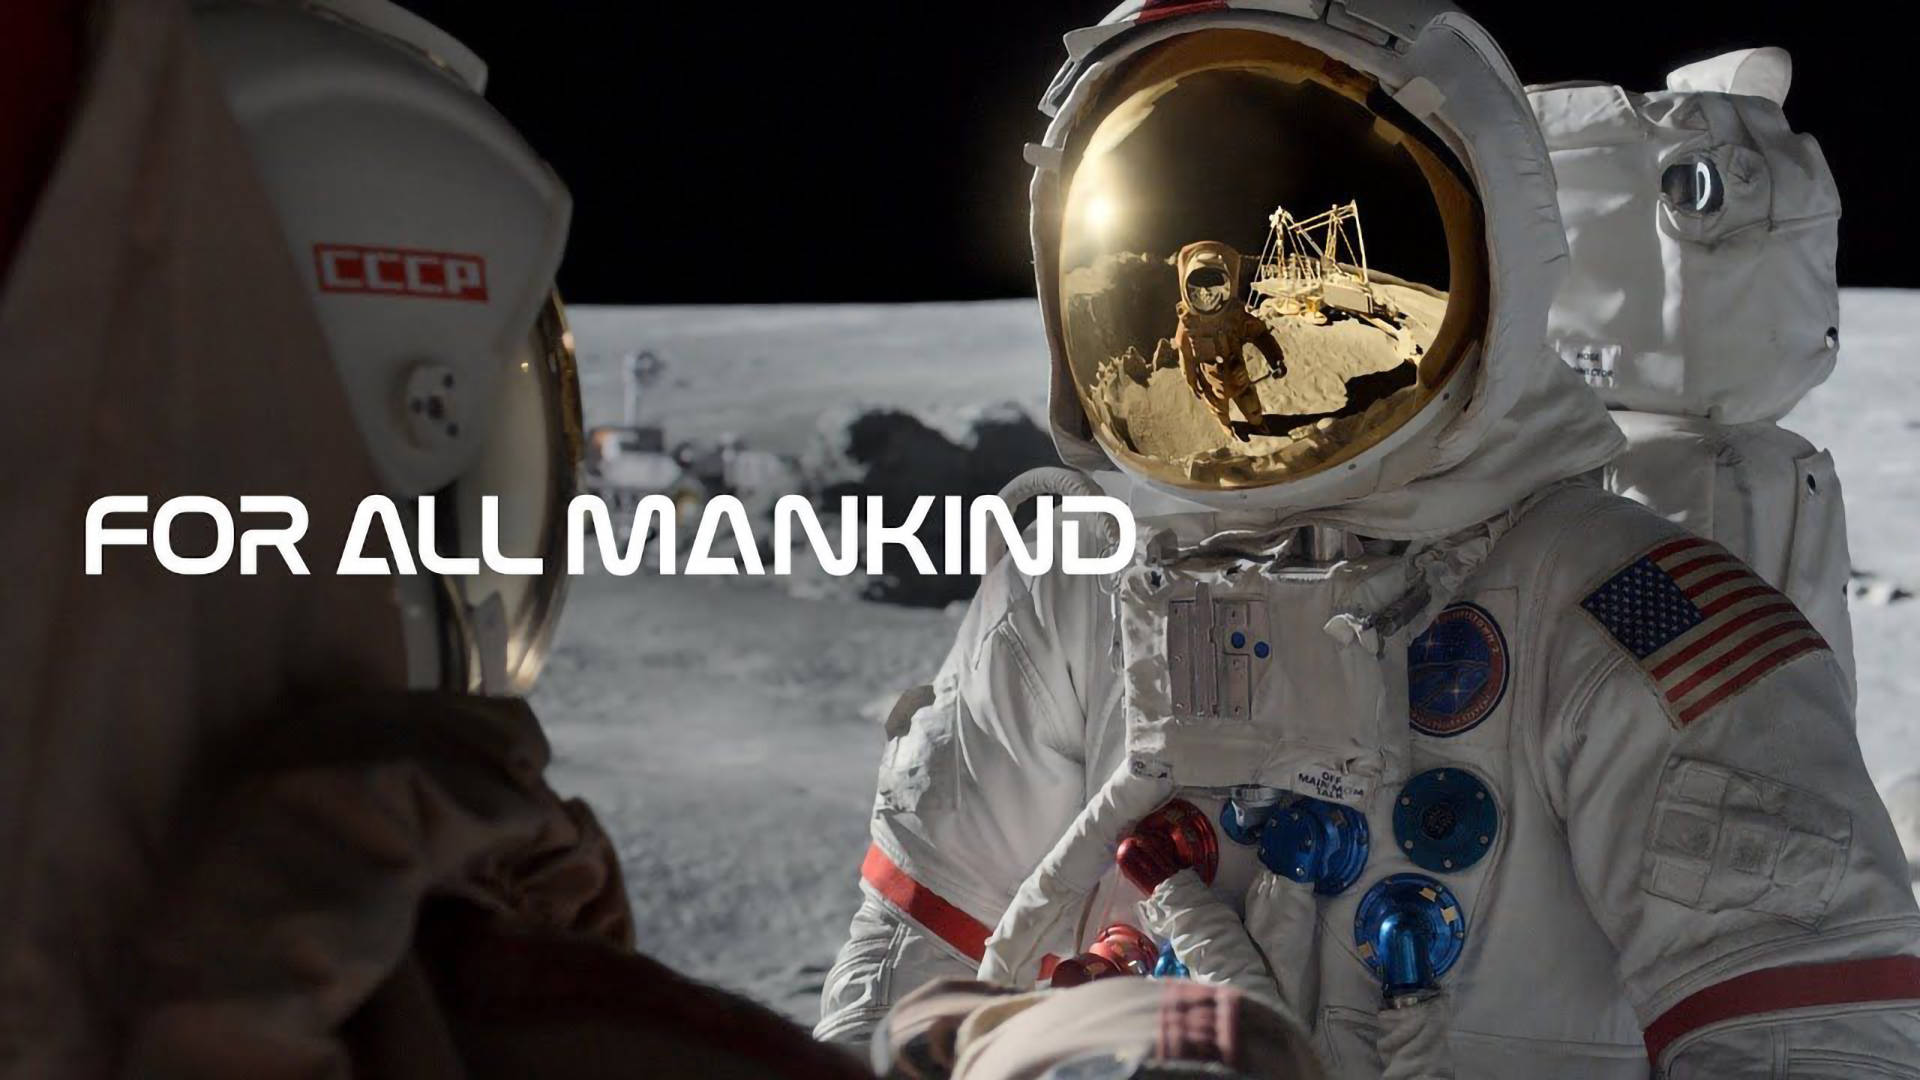 For All Mankind Two Astronauts On Moon Background